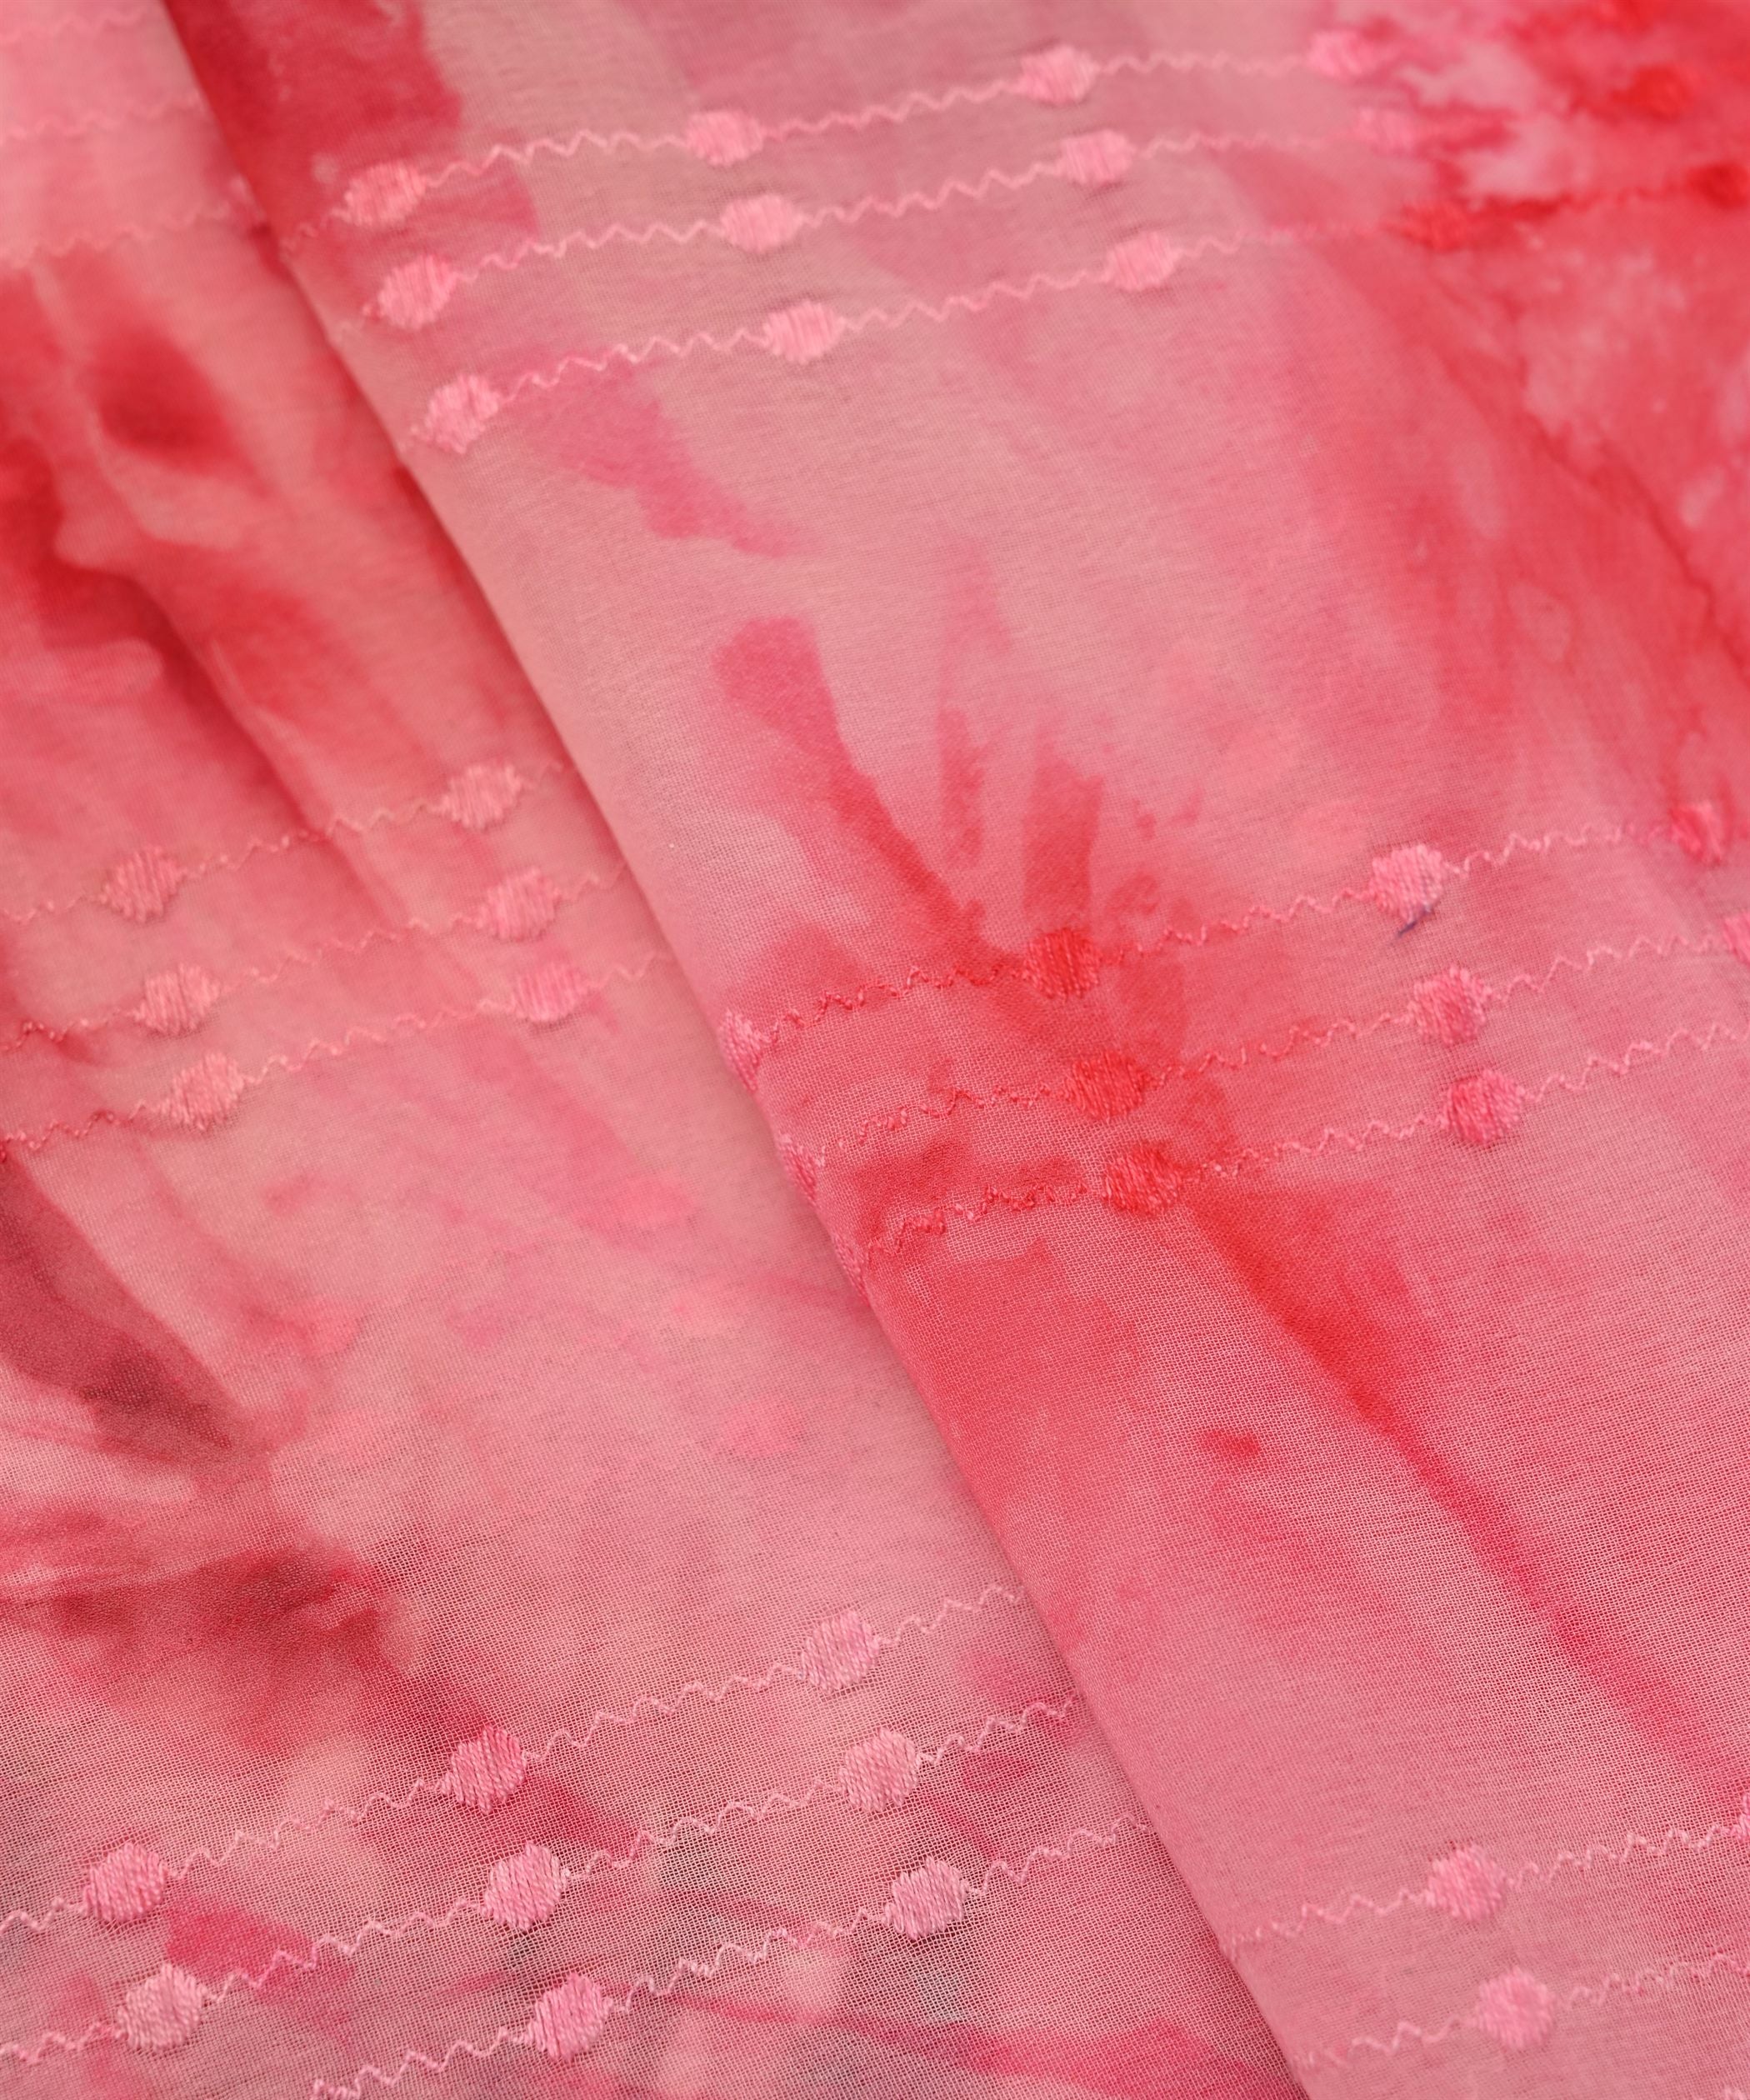 Hot Pink Tie and Dye Weightless Fabric with Thread Lines